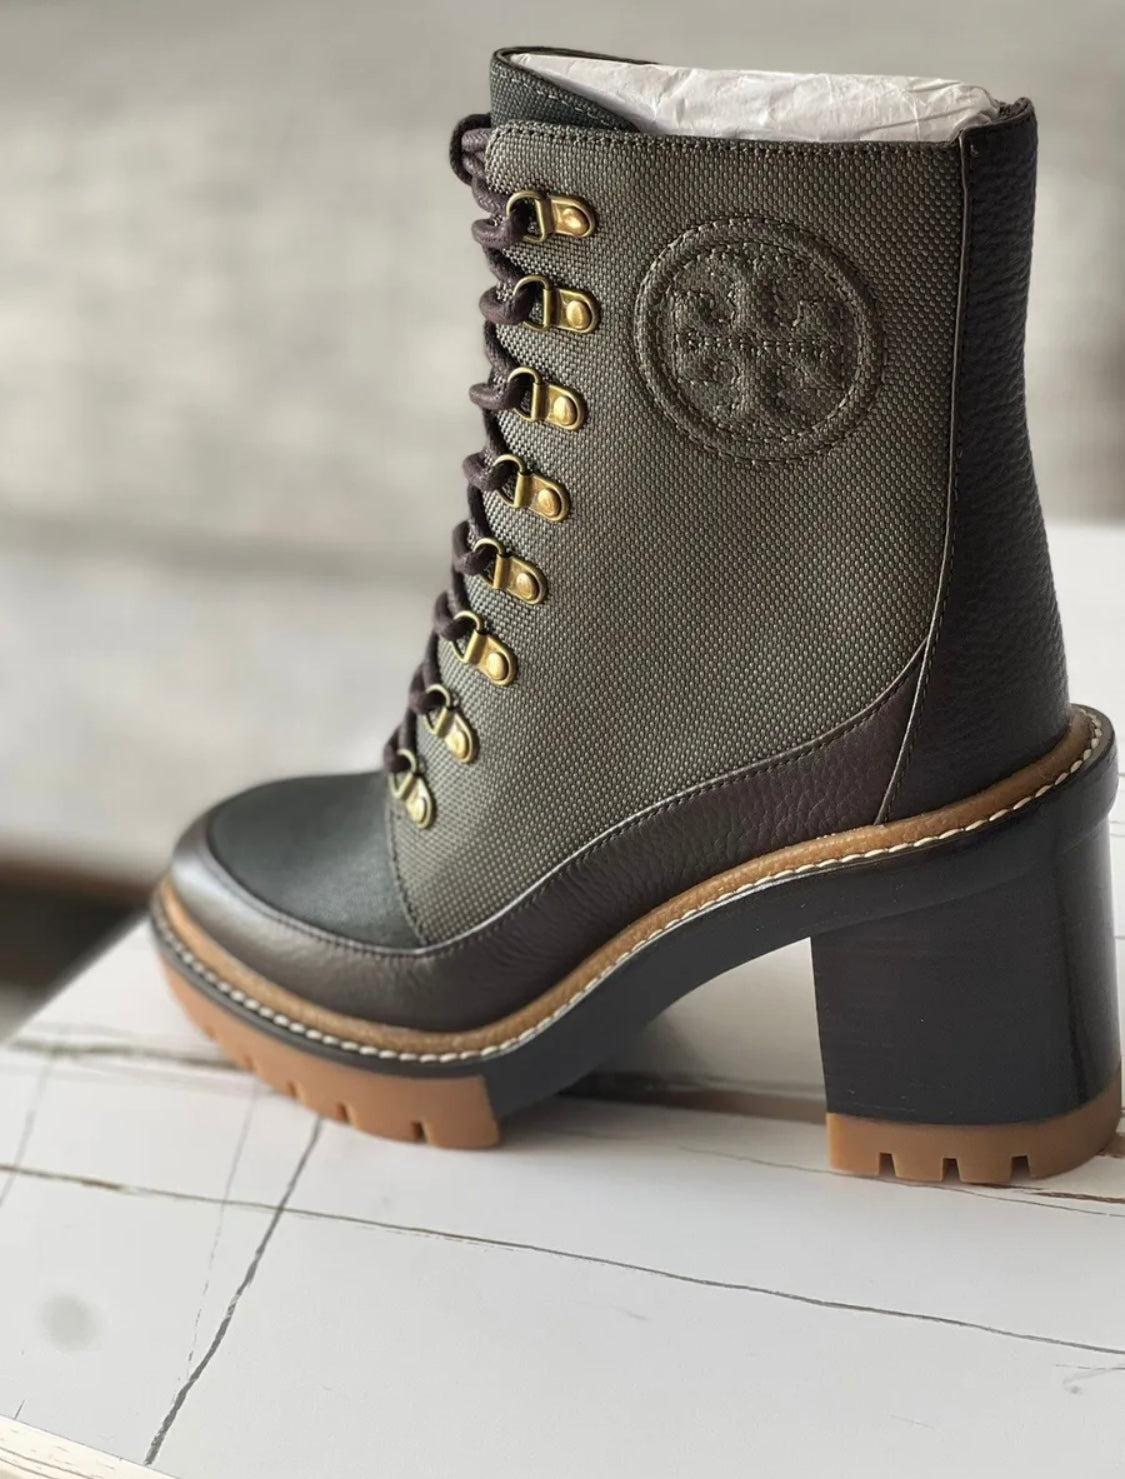 Tory Burch MILLER LUG-SOLE ANKLE BOOT, Olive / Militare / Brown, Size 9